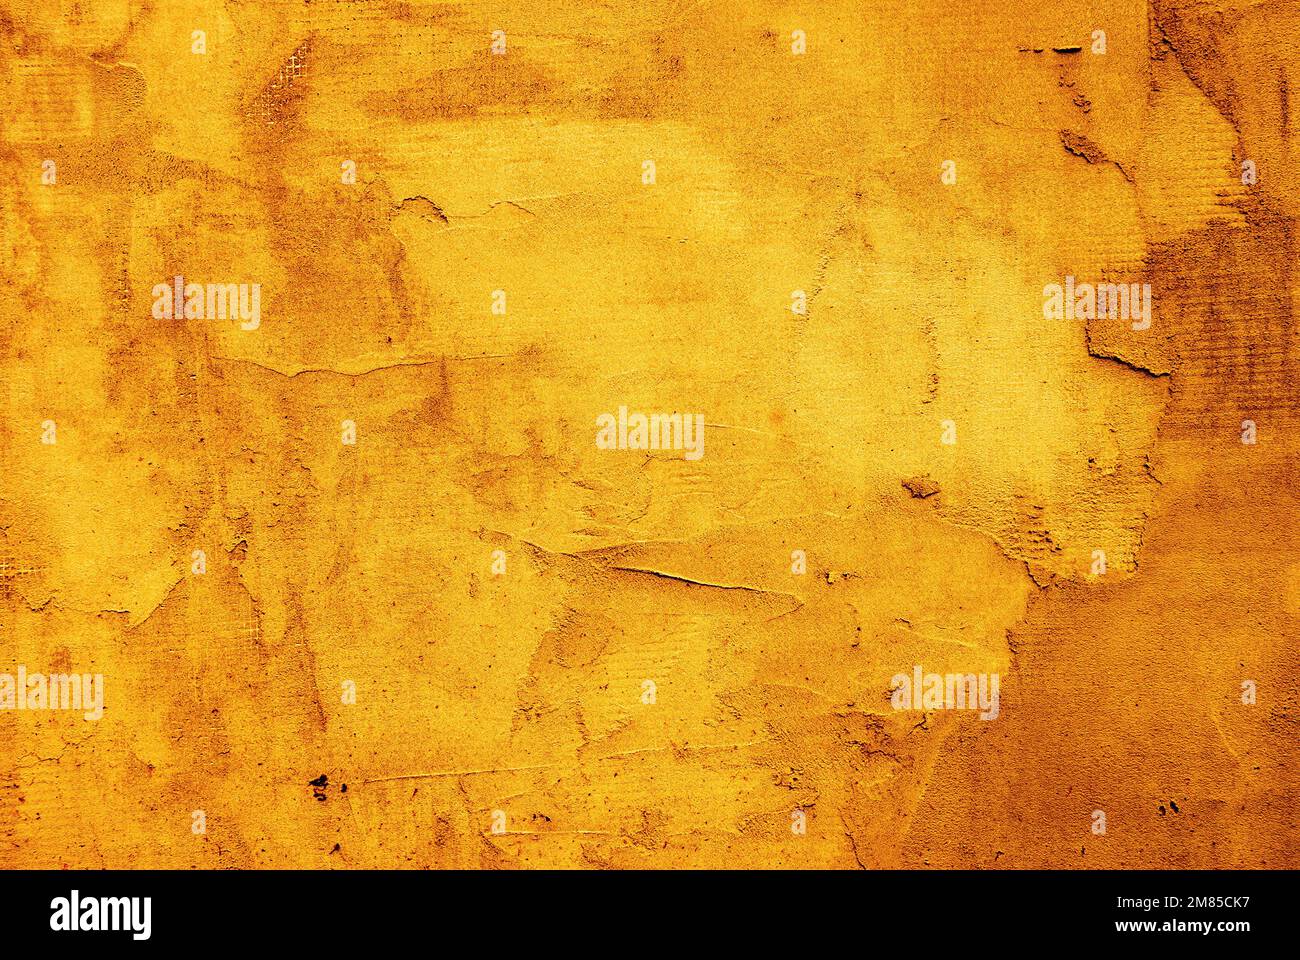 Grunge yellow painted damaged wall texture background. Stock Photo